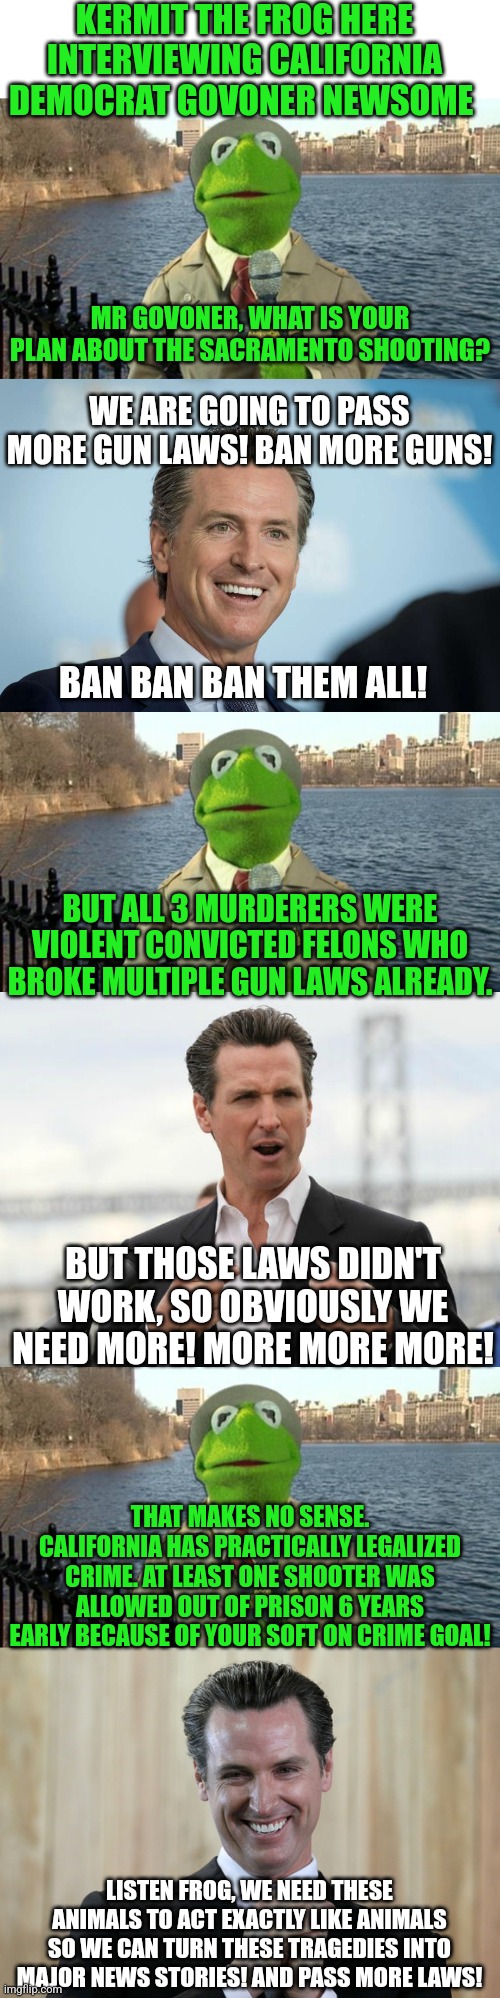 Ever think crime is deliberately being promoted to justify more liberal gun bans? What took you so long to figure it out? |  KERMIT THE FROG HERE INTERVIEWING CALIFORNIA DEMOCRAT GOVONER NEWSOME; MR GOVONER, WHAT IS YOUR PLAN ABOUT THE SACRAMENTO SHOOTING? WE ARE GOING TO PASS MORE GUN LAWS! BAN MORE GUNS! BAN BAN BAN THEM ALL! BUT ALL 3 MURDERERS WERE VIOLENT CONVICTED FELONS WHO BROKE MULTIPLE GUN LAWS ALREADY. BUT THOSE LAWS DIDN'T WORK, SO OBVIOUSLY WE NEED MORE! MORE MORE MORE! THAT MAKES NO SENSE. CALIFORNIA HAS PRACTICALLY LEGALIZED CRIME. AT LEAST ONE SHOOTER WAS ALLOWED OUT OF PRISON 6 YEARS EARLY BECAUSE OF YOUR SOFT ON CRIME GOAL! LISTEN FROG, WE NEED THESE ANIMALS TO ACT EXACTLY LIKE ANIMALS SO WE CAN TURN THESE TRAGEDIES INTO MAJOR NEWS STORIES! AND PASS MORE LAWS! | image tagged in kermit news report,gavin newsom,guns,liberals,black,prison | made w/ Imgflip meme maker